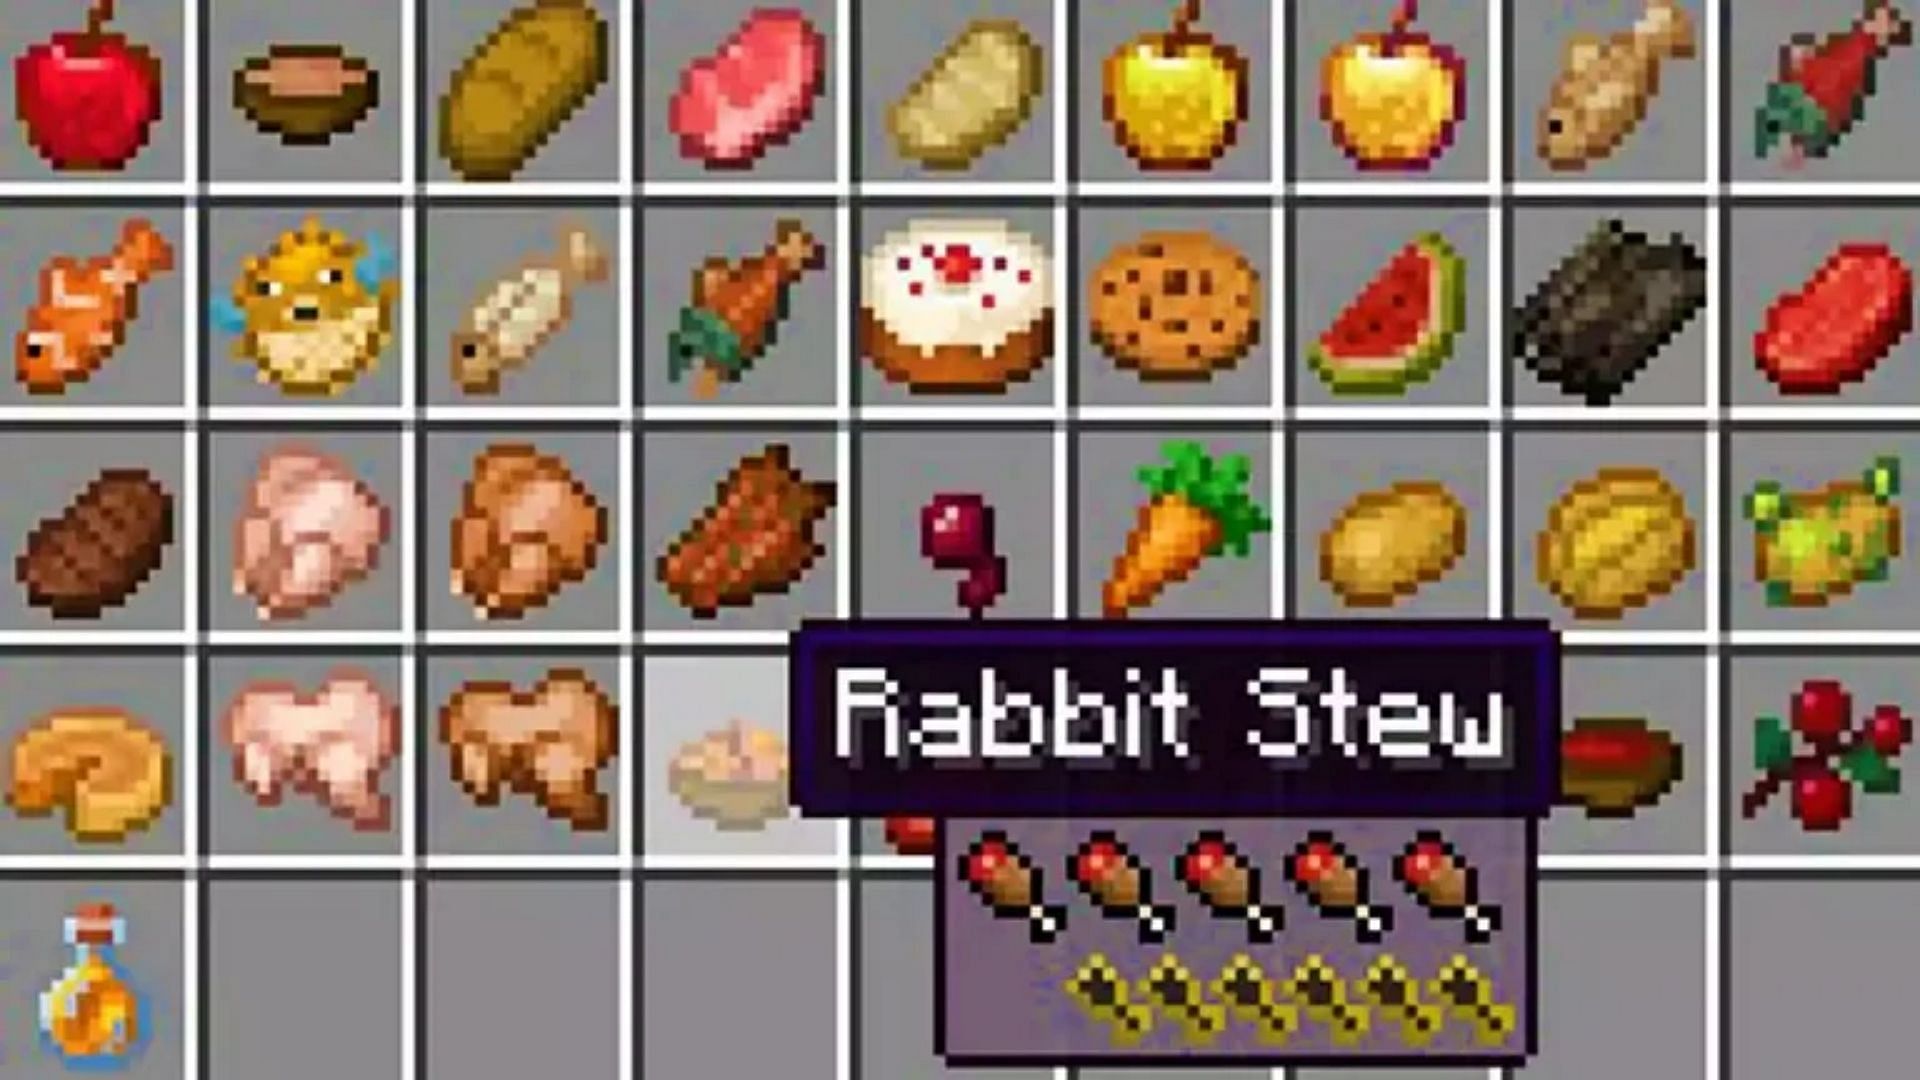 AppleSkin adds useful information about different food items in Minecraft (Image via Mojang)